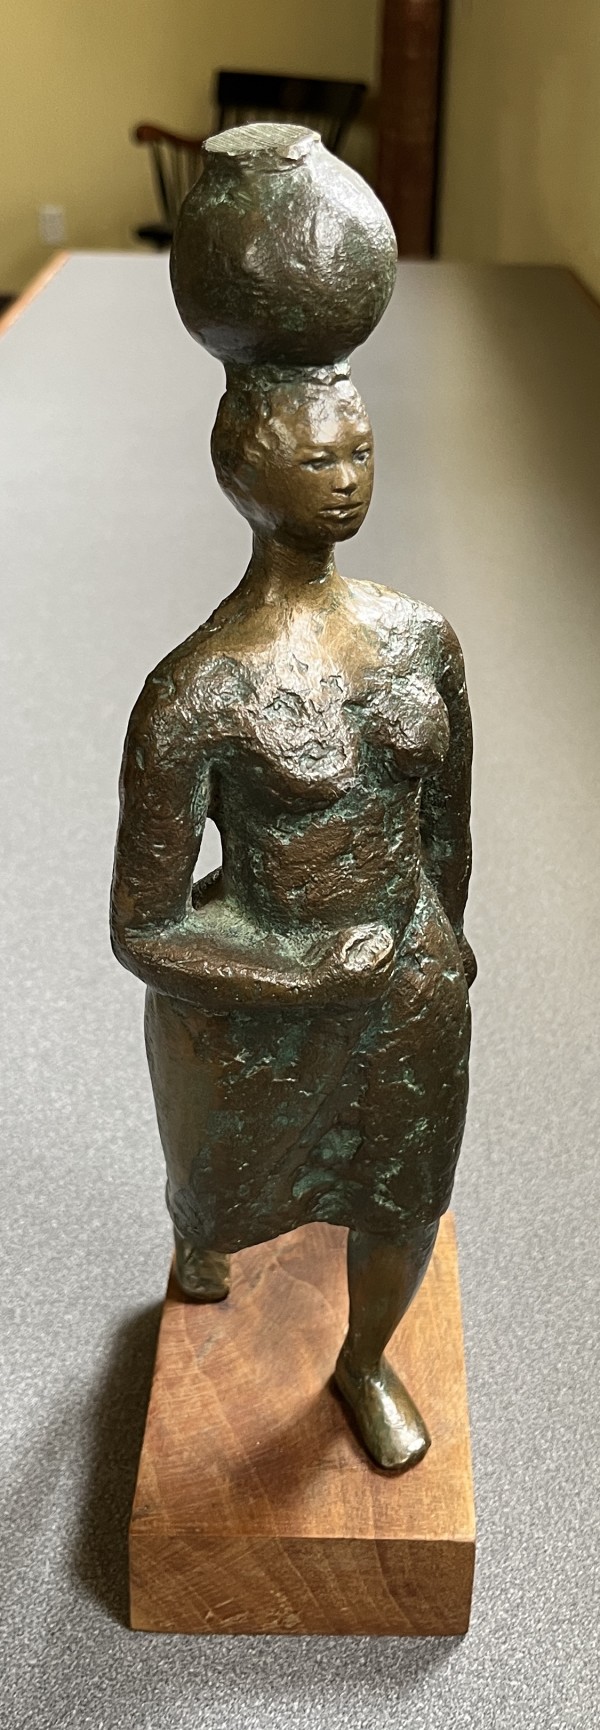 Coastal Woman by Mary Miller Michie